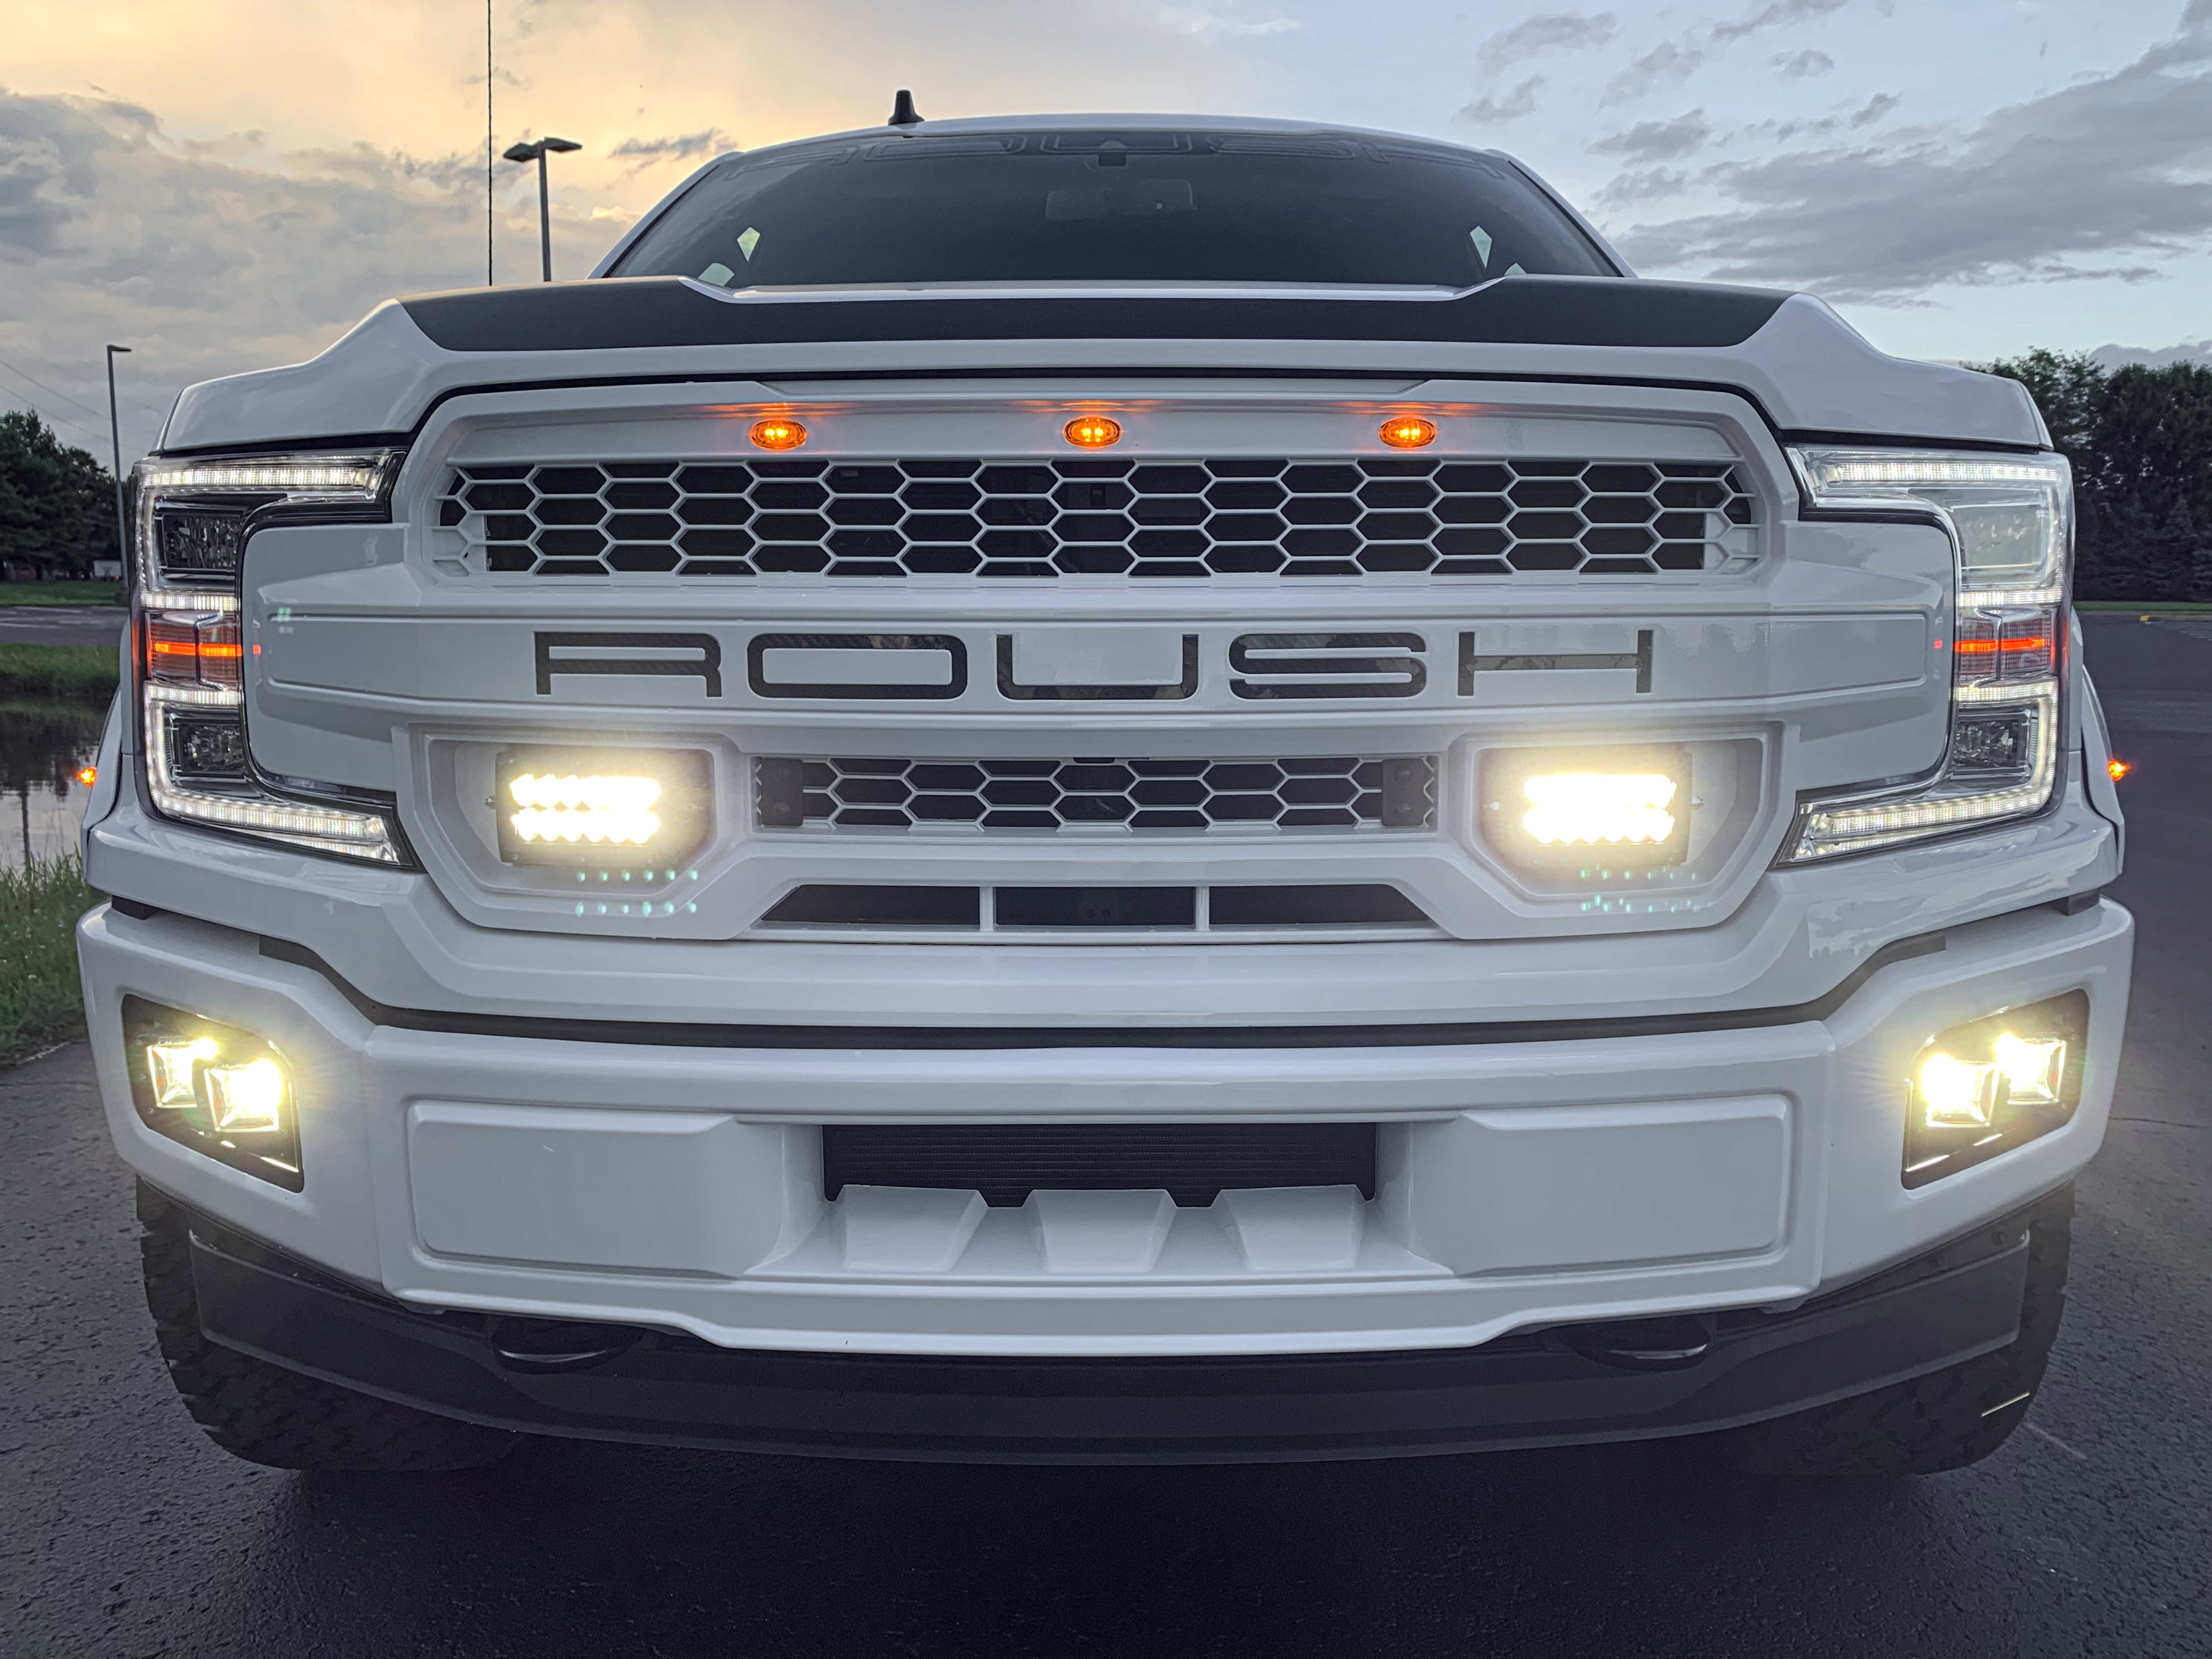 SPV Parts 2018-2020 Ford F-150 Build Your Own KDF Dual Fog Kit